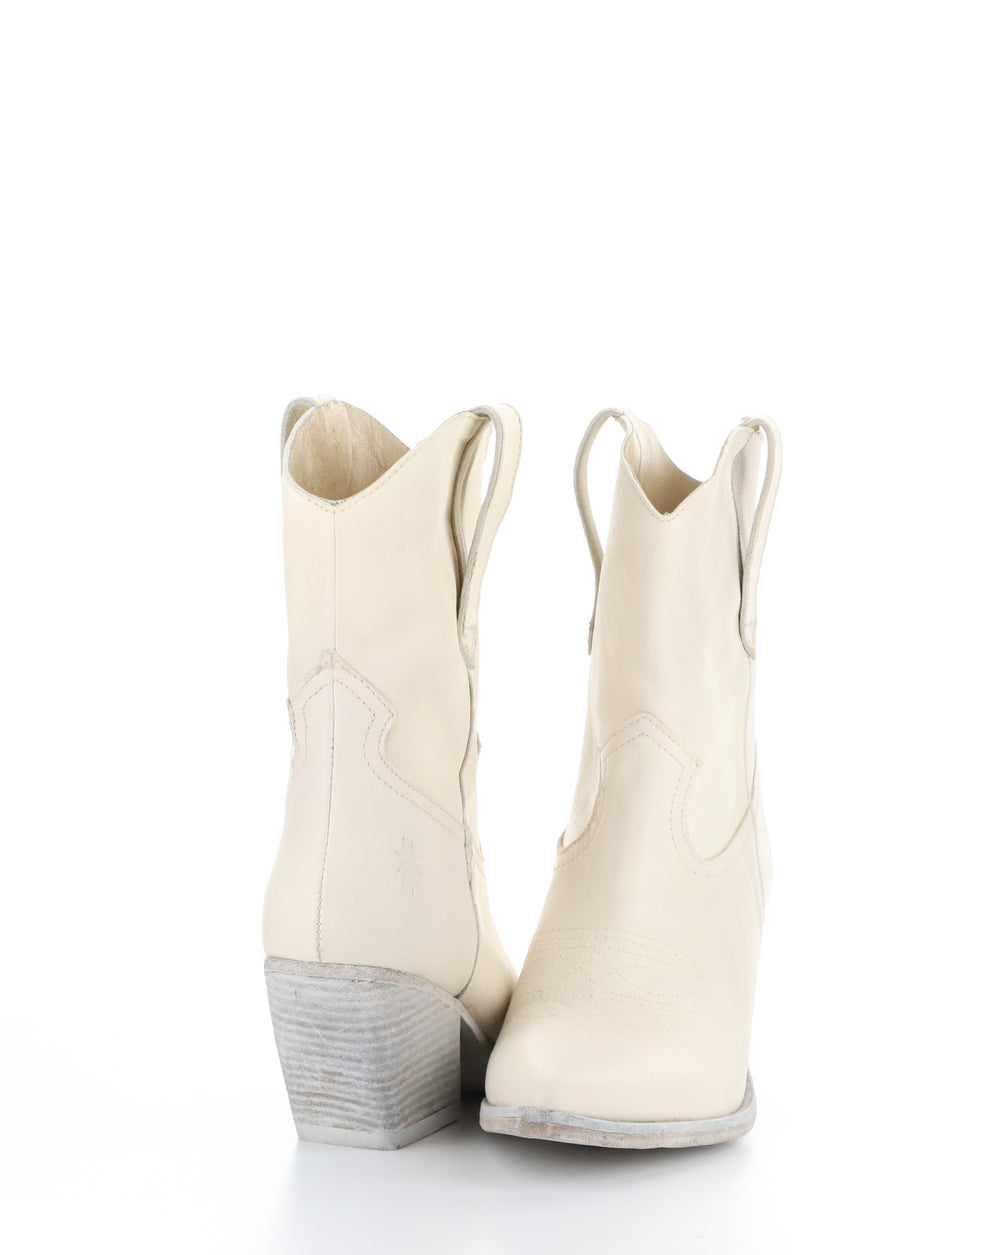 WOFY093FLY 000 OFF WHITE Cowboy Boots